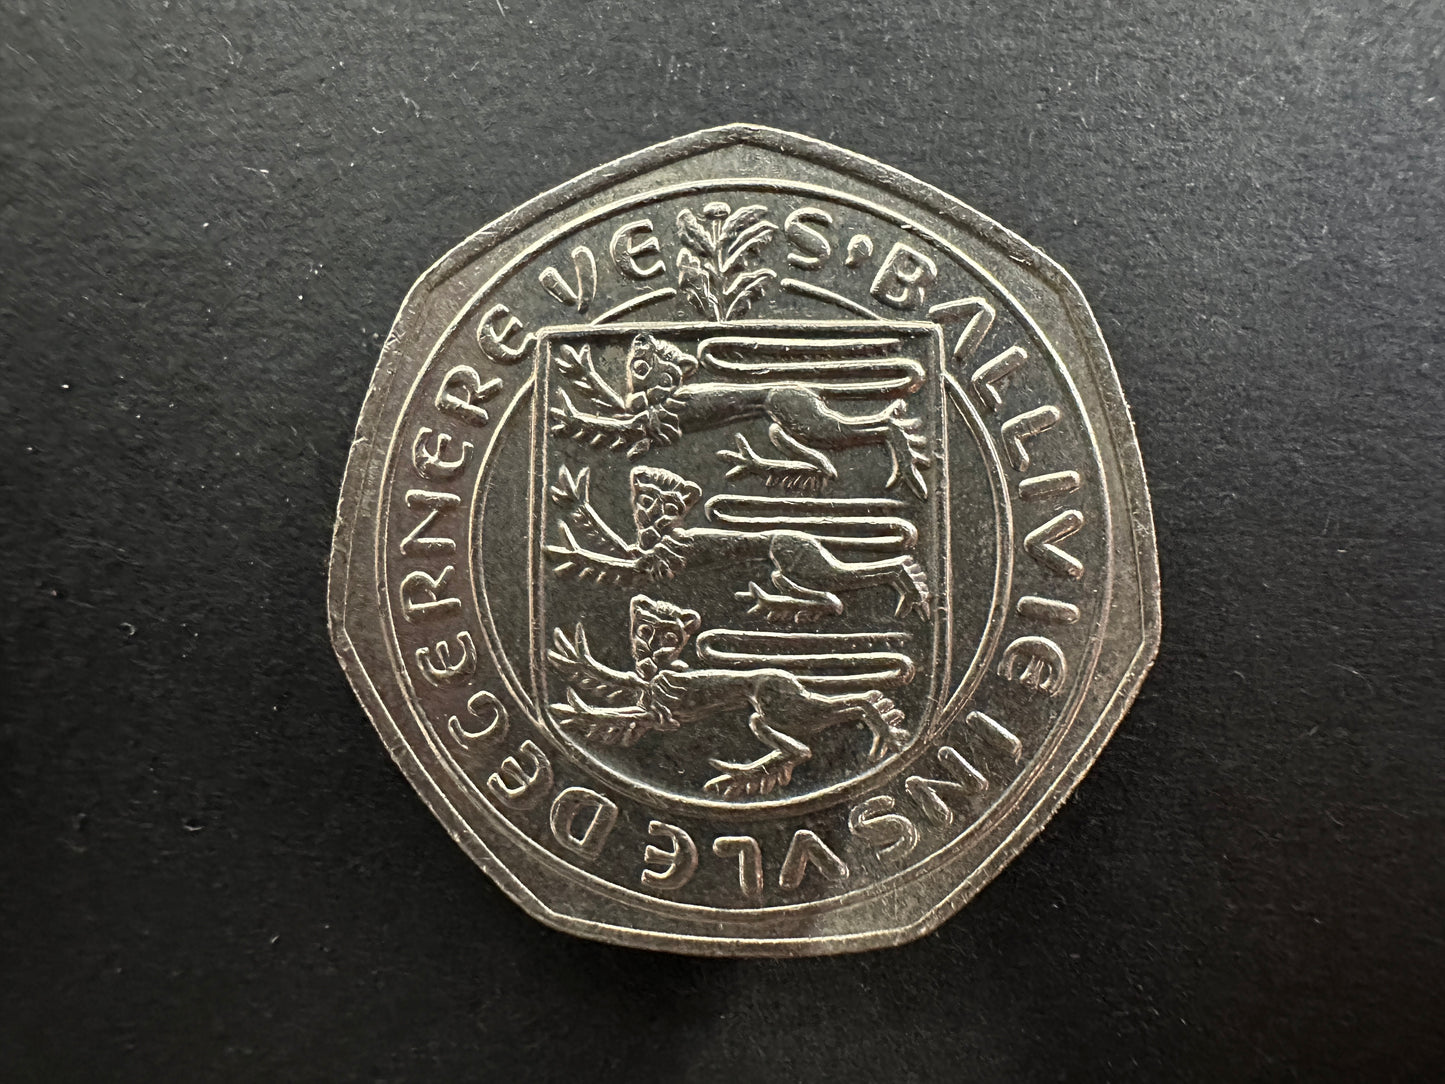 1984 Guernsey Fifty Pence (50p) Coin - Ducal Cap - FREE Postage